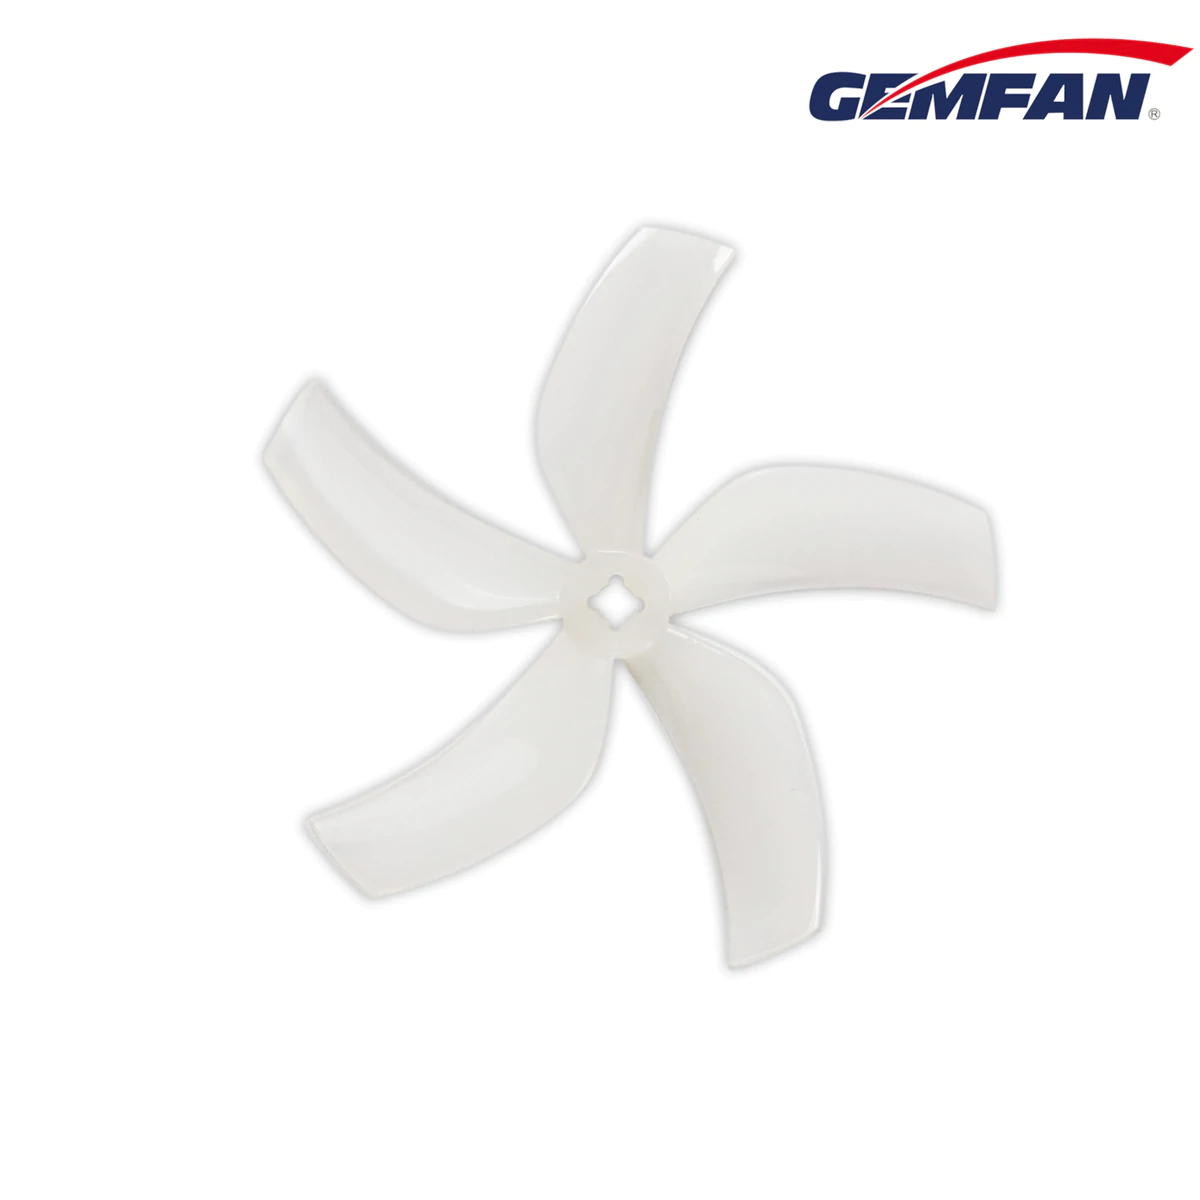 GEMFAN D90 DUCTED DURABLE 5 BLADE (2CW+2CCW) - Milky White